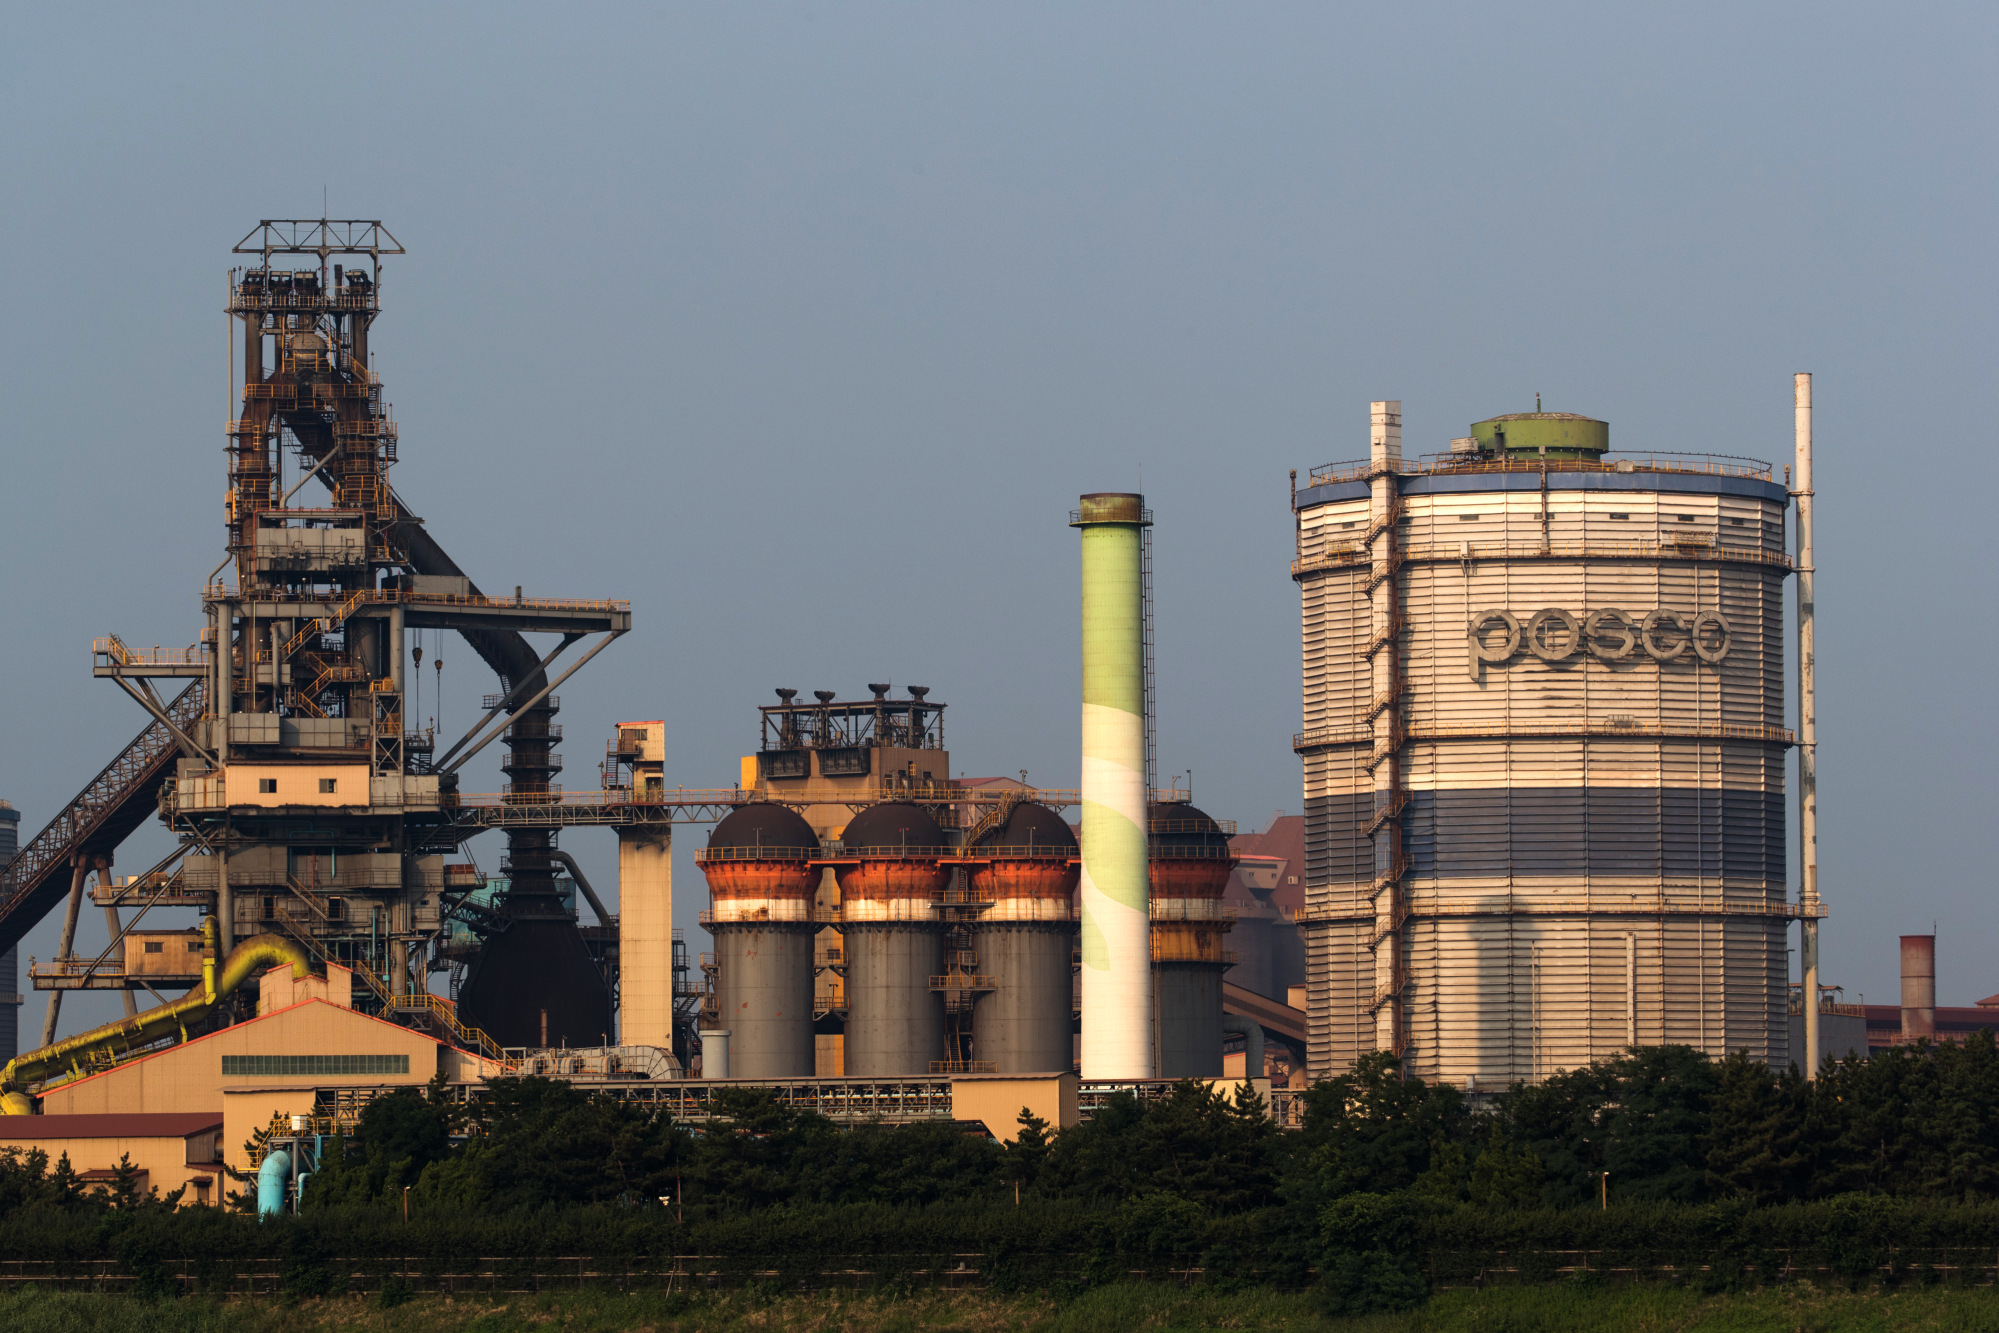 Posco completes steel plant in China to meet EV demand